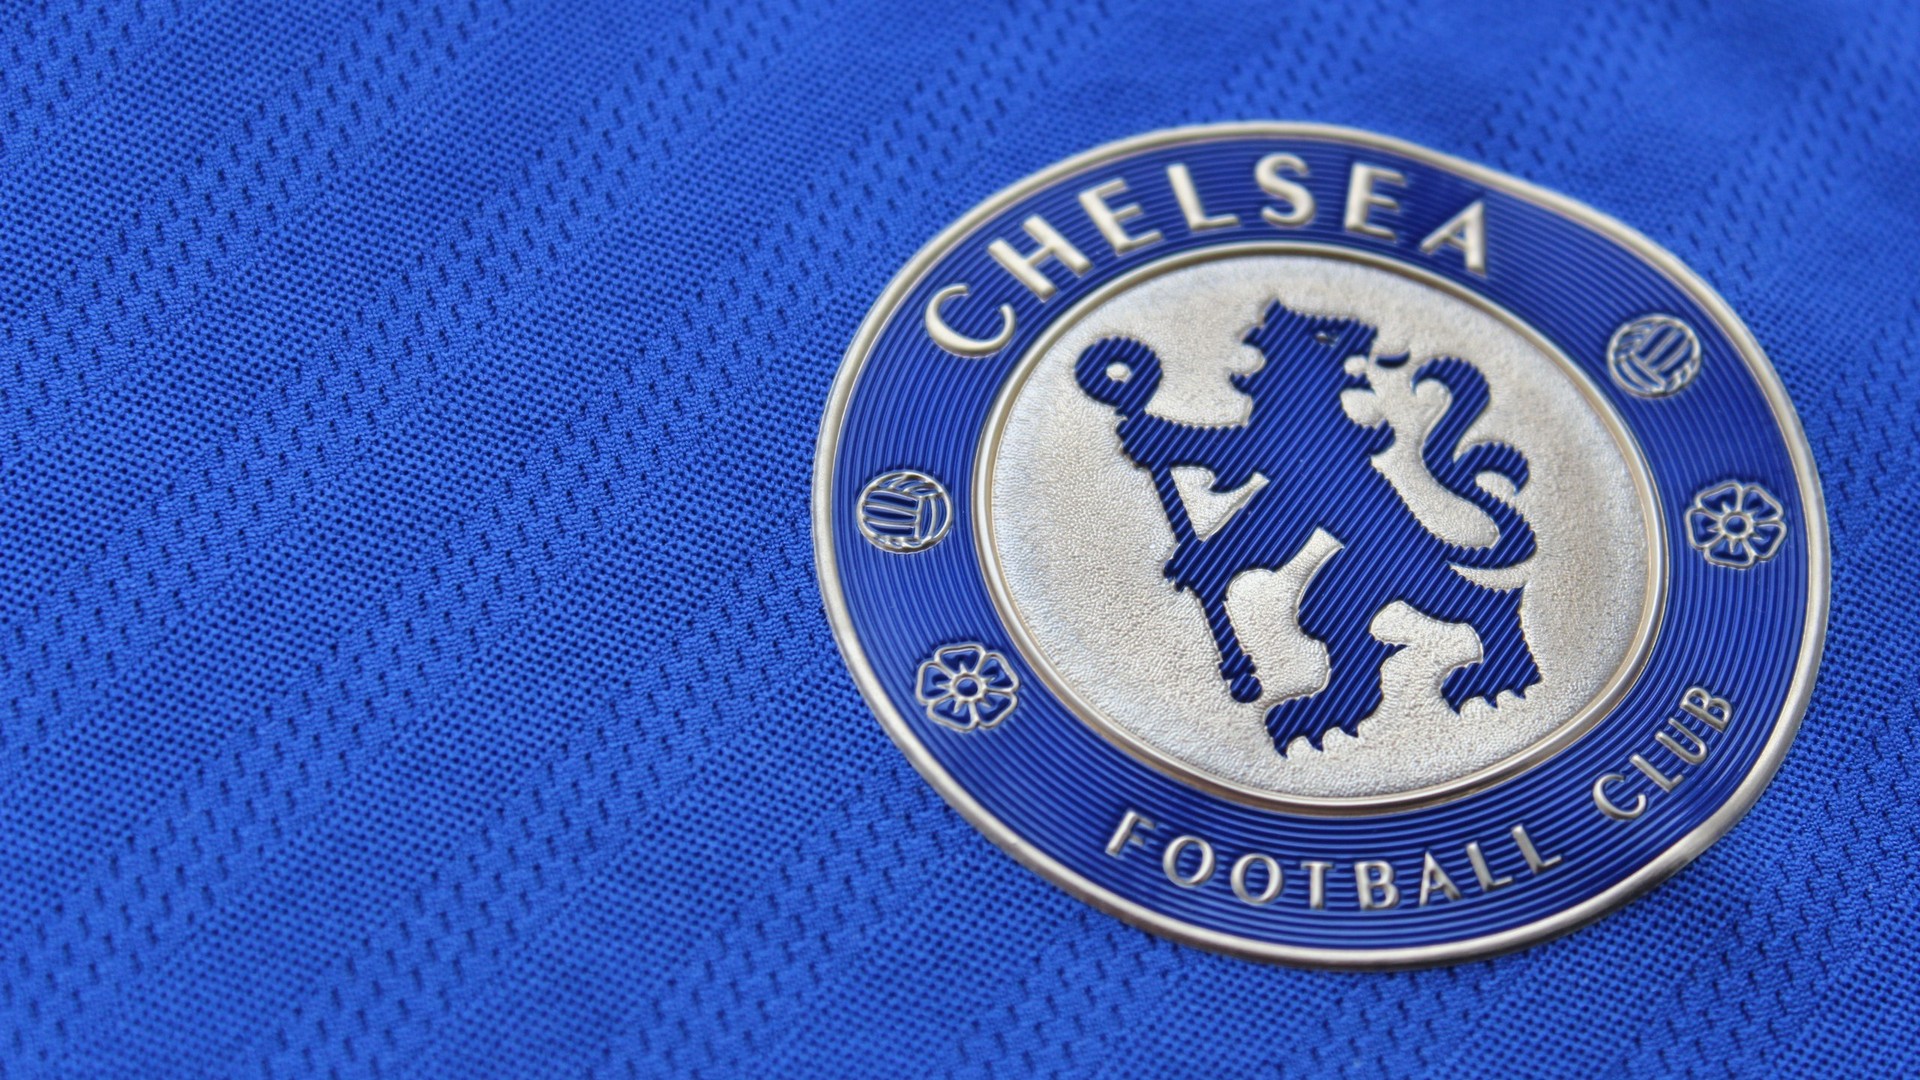 Chelsea Logo Wallpaper HD With high-resolution 1920X1080 pixel. You can use this wallpaper for your Desktop Computers, Mac Screensavers, Windows Backgrounds, iPhone Wallpapers, Tablet or Android Lock screen and another Mobile device